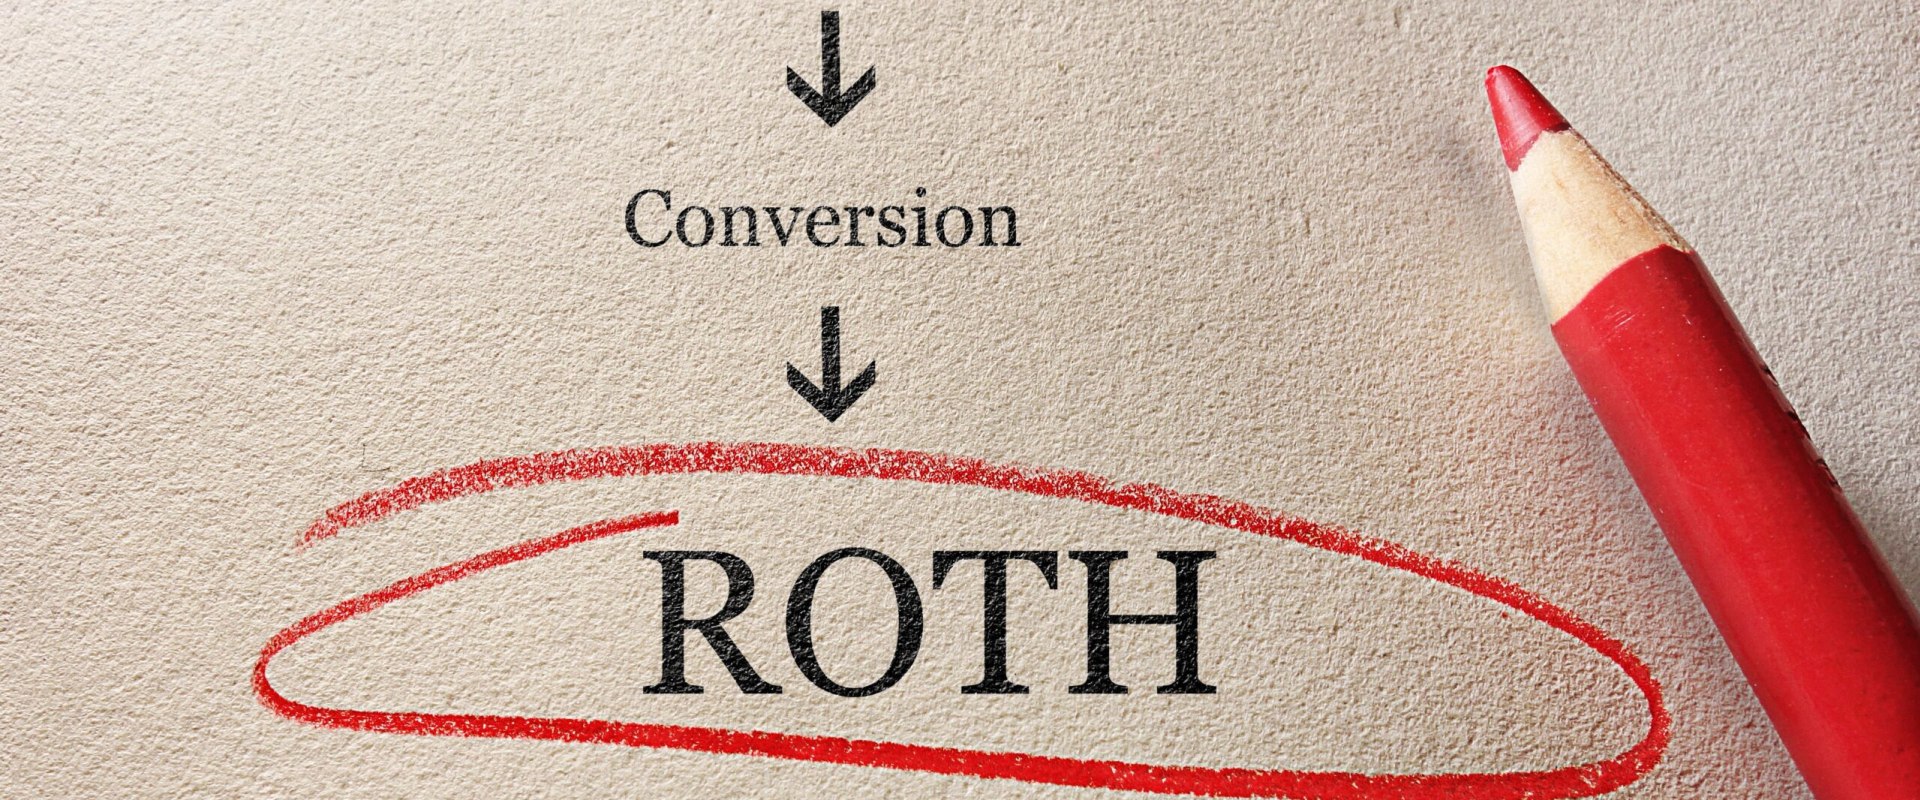 Converting an IRA to a Roth IRA: A Strategic Financial Move